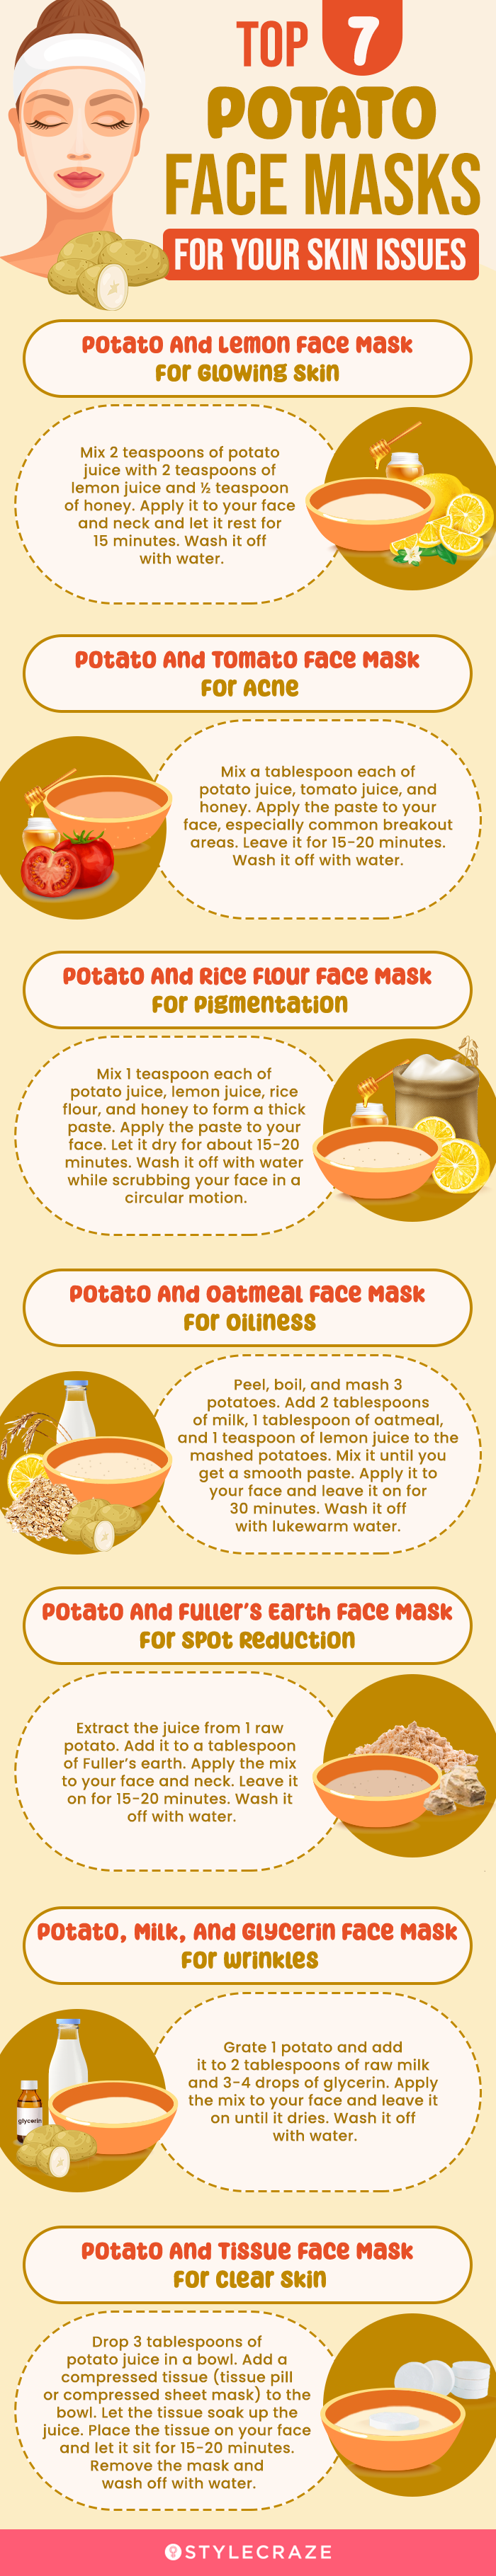 top 7 potato face masks for your skin issues (infographic)